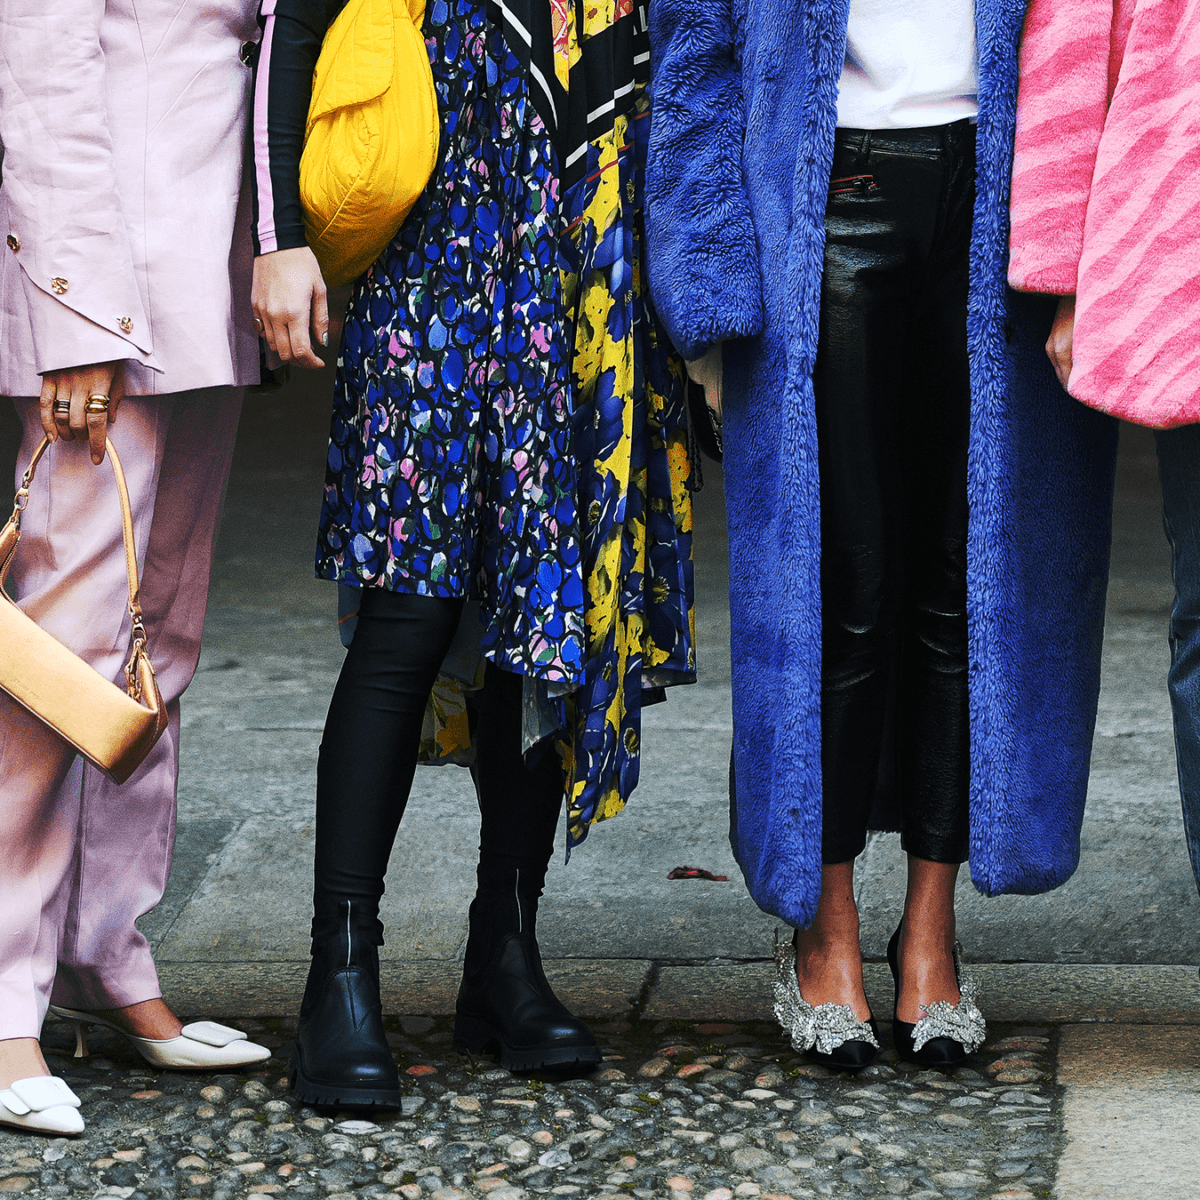 Five women dressed in colourful fashionable outfits stand in a row